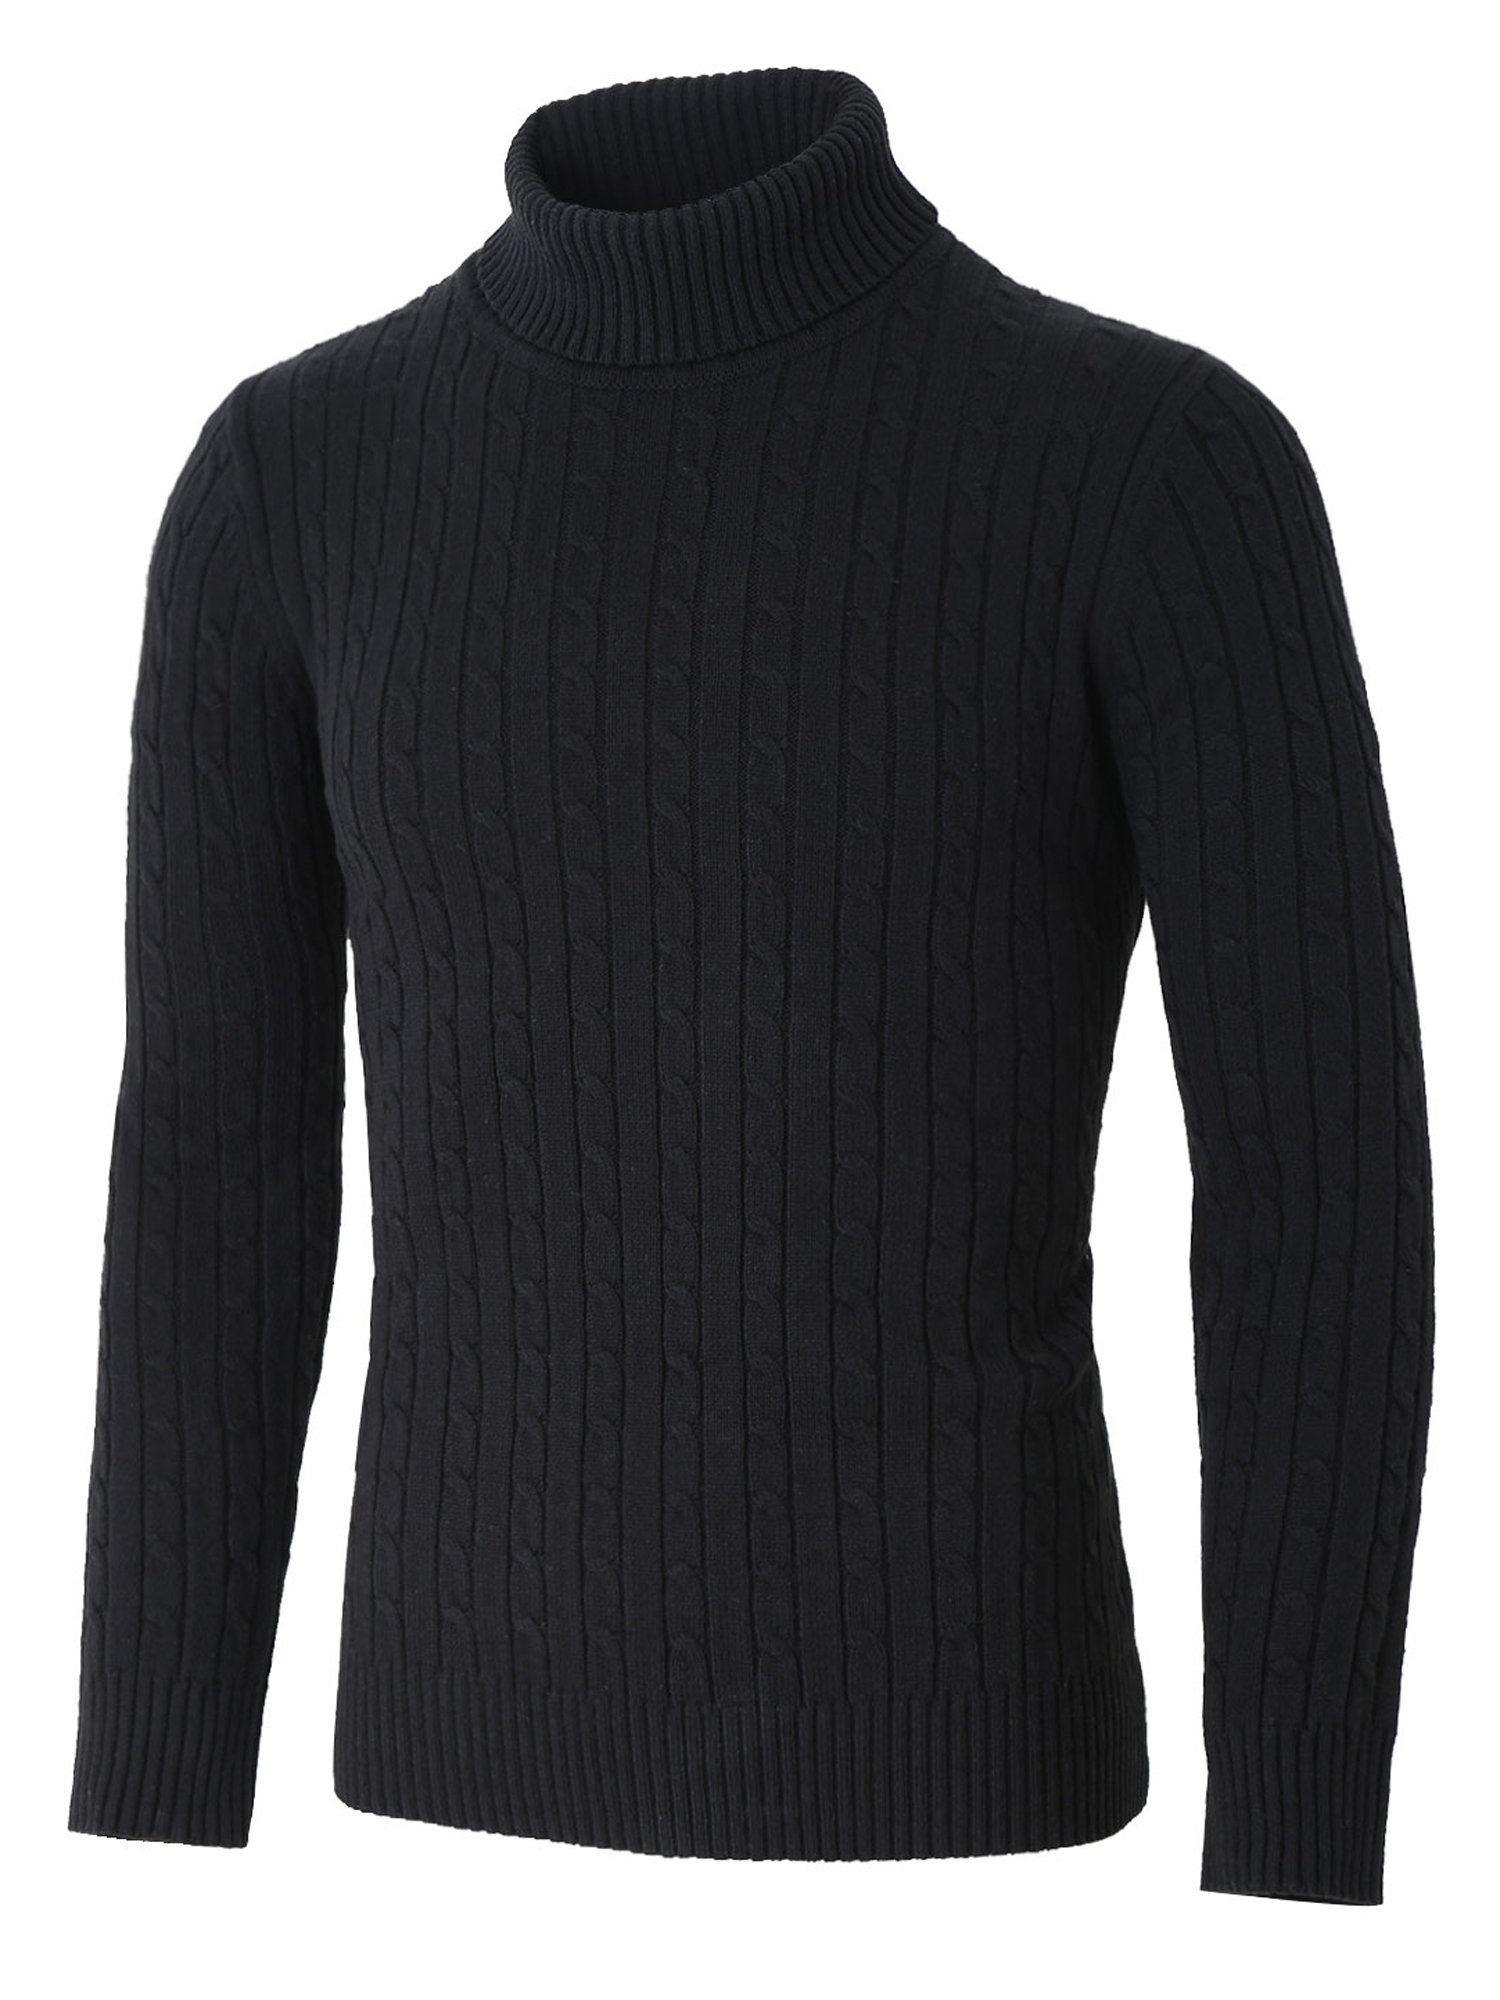 Unique Bargains Men's Turtleneck Long Sleeves Pullover Cable Knit Sweater - image 1 of 7